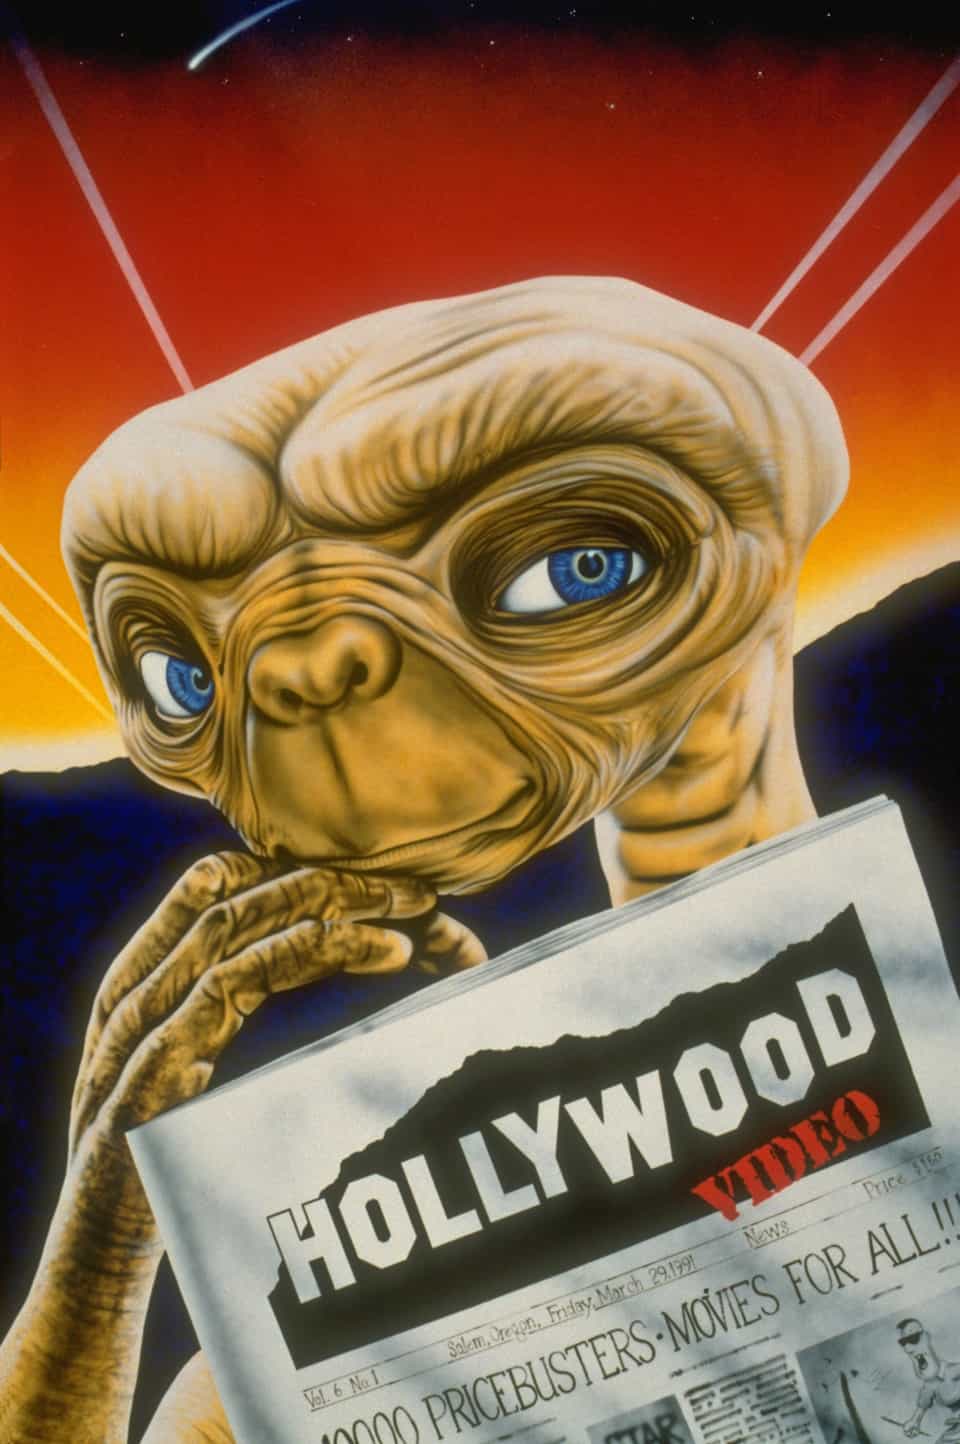 ET wall mural by A.D. Cook for Hollywood Video